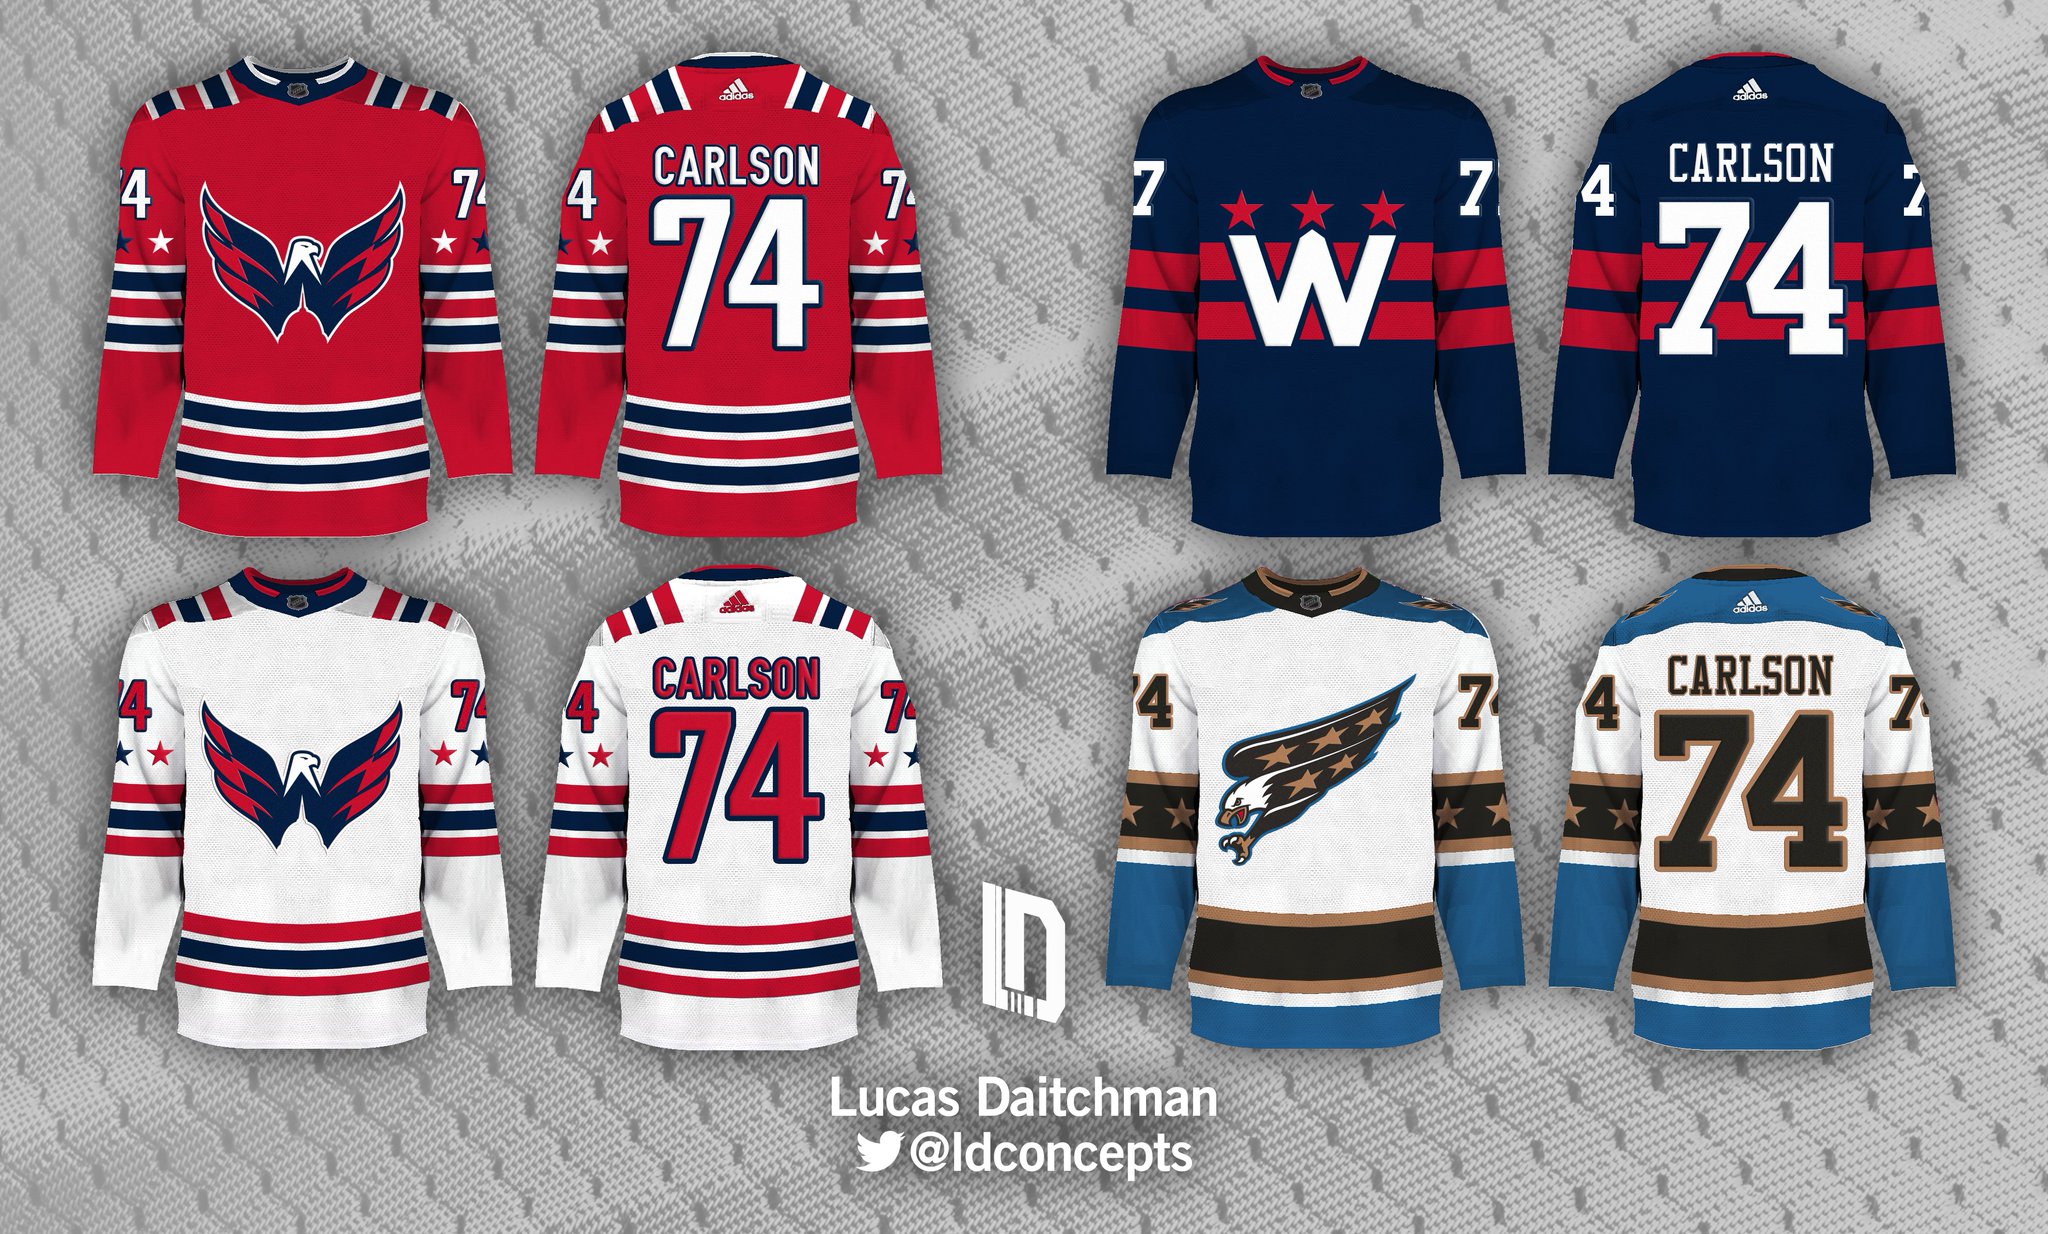 Lucas Daitchman on X: The success of the @Capitals' Reverse Retro release  created a new option for the team's brand moving forward. With this  concept, I used their modern Weagle logo as